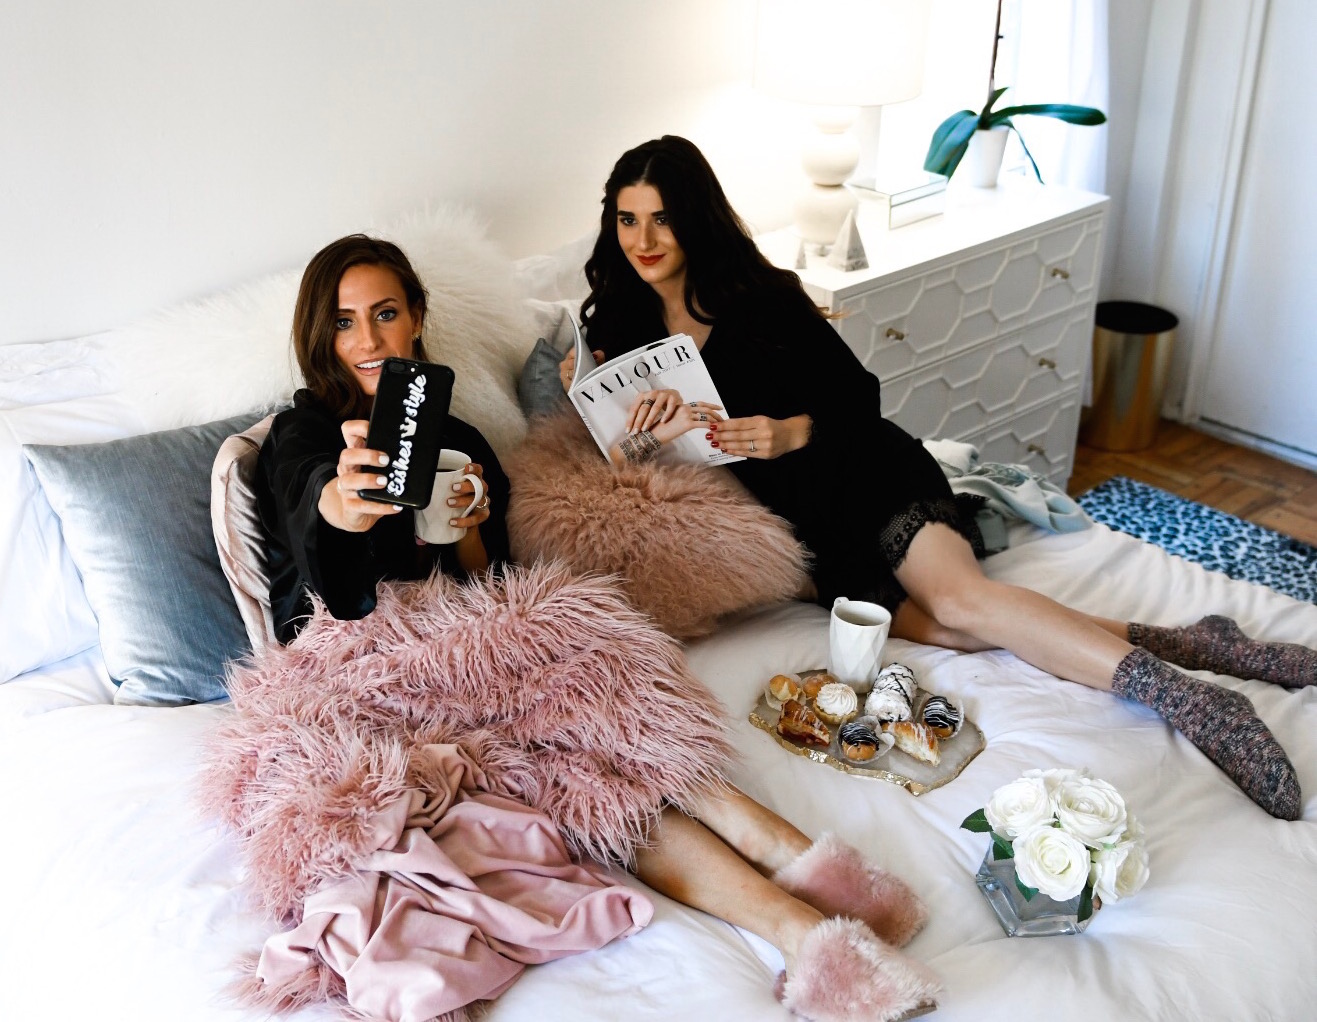 Girls' Night In With Valour Magazine Esther Santer Fashion Blog NYC Street Style Blogger Outfit OOTD Trendy Eishes Style Cozy Blanket Throw Pillows Flowers Desserts Pastries Black Robes Pink Fur Fuzzy Slippers  Jcrew Adore Me Socks Mugs Coffee  Women.jpg